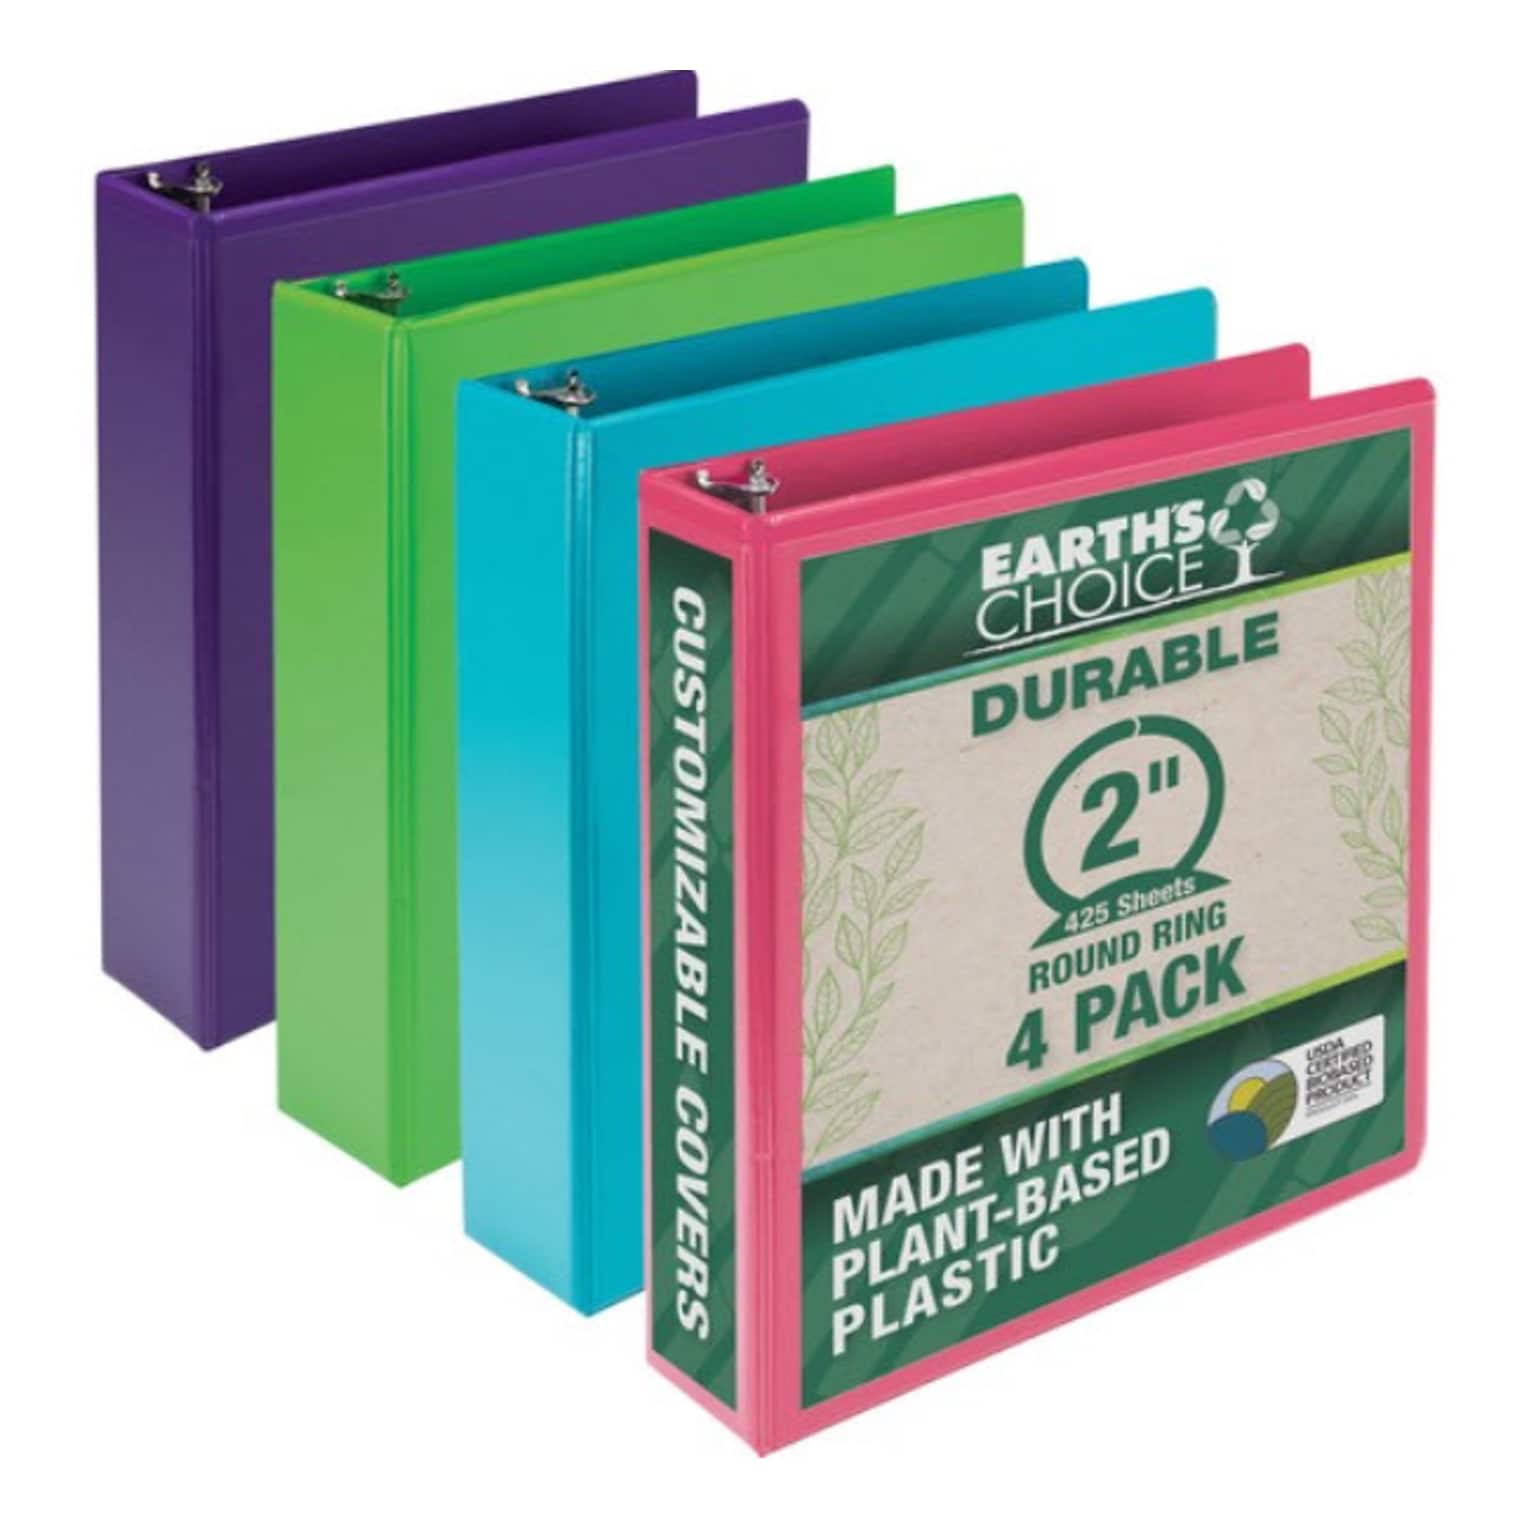 Samsill Earths Choice 2 3-Ring View Binder, Assorted Colors, 4/Pack (SAMMS48669)